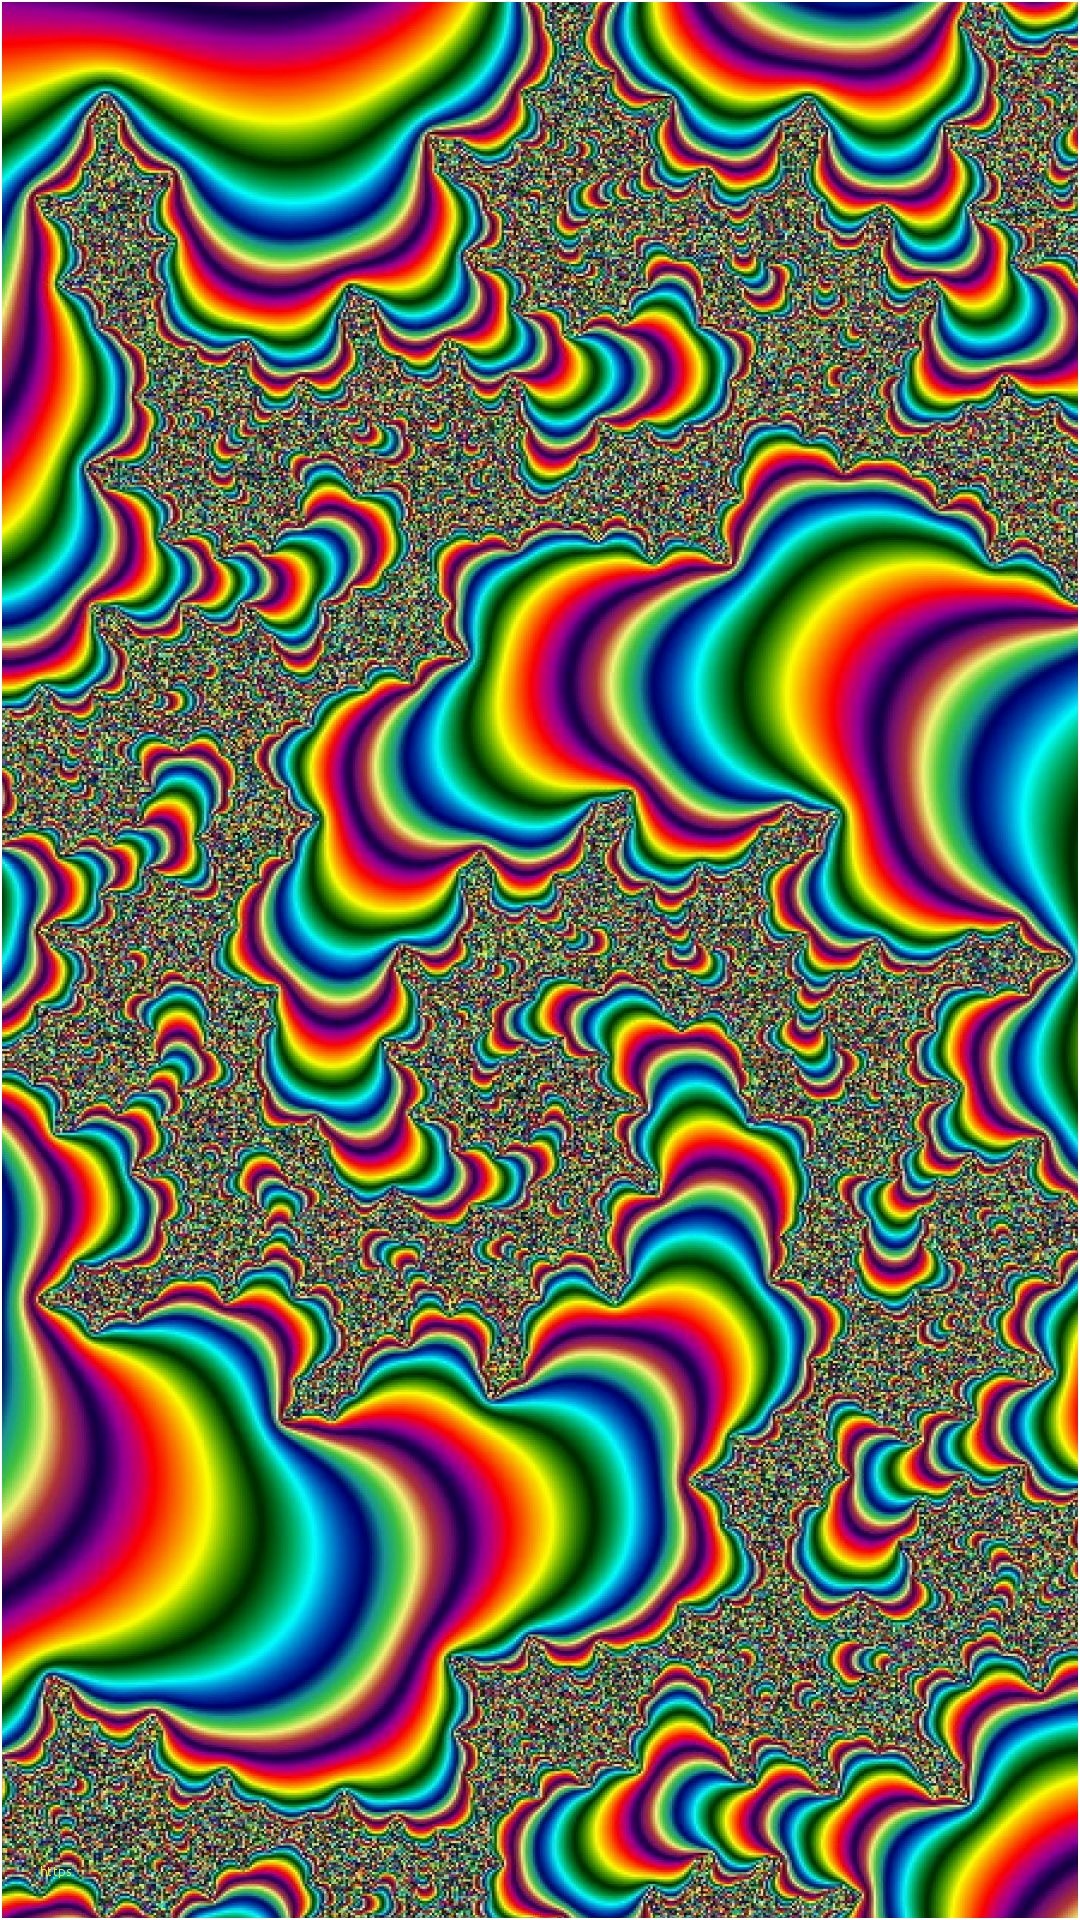 Trippy HD Wallpaper (72+ pictures)